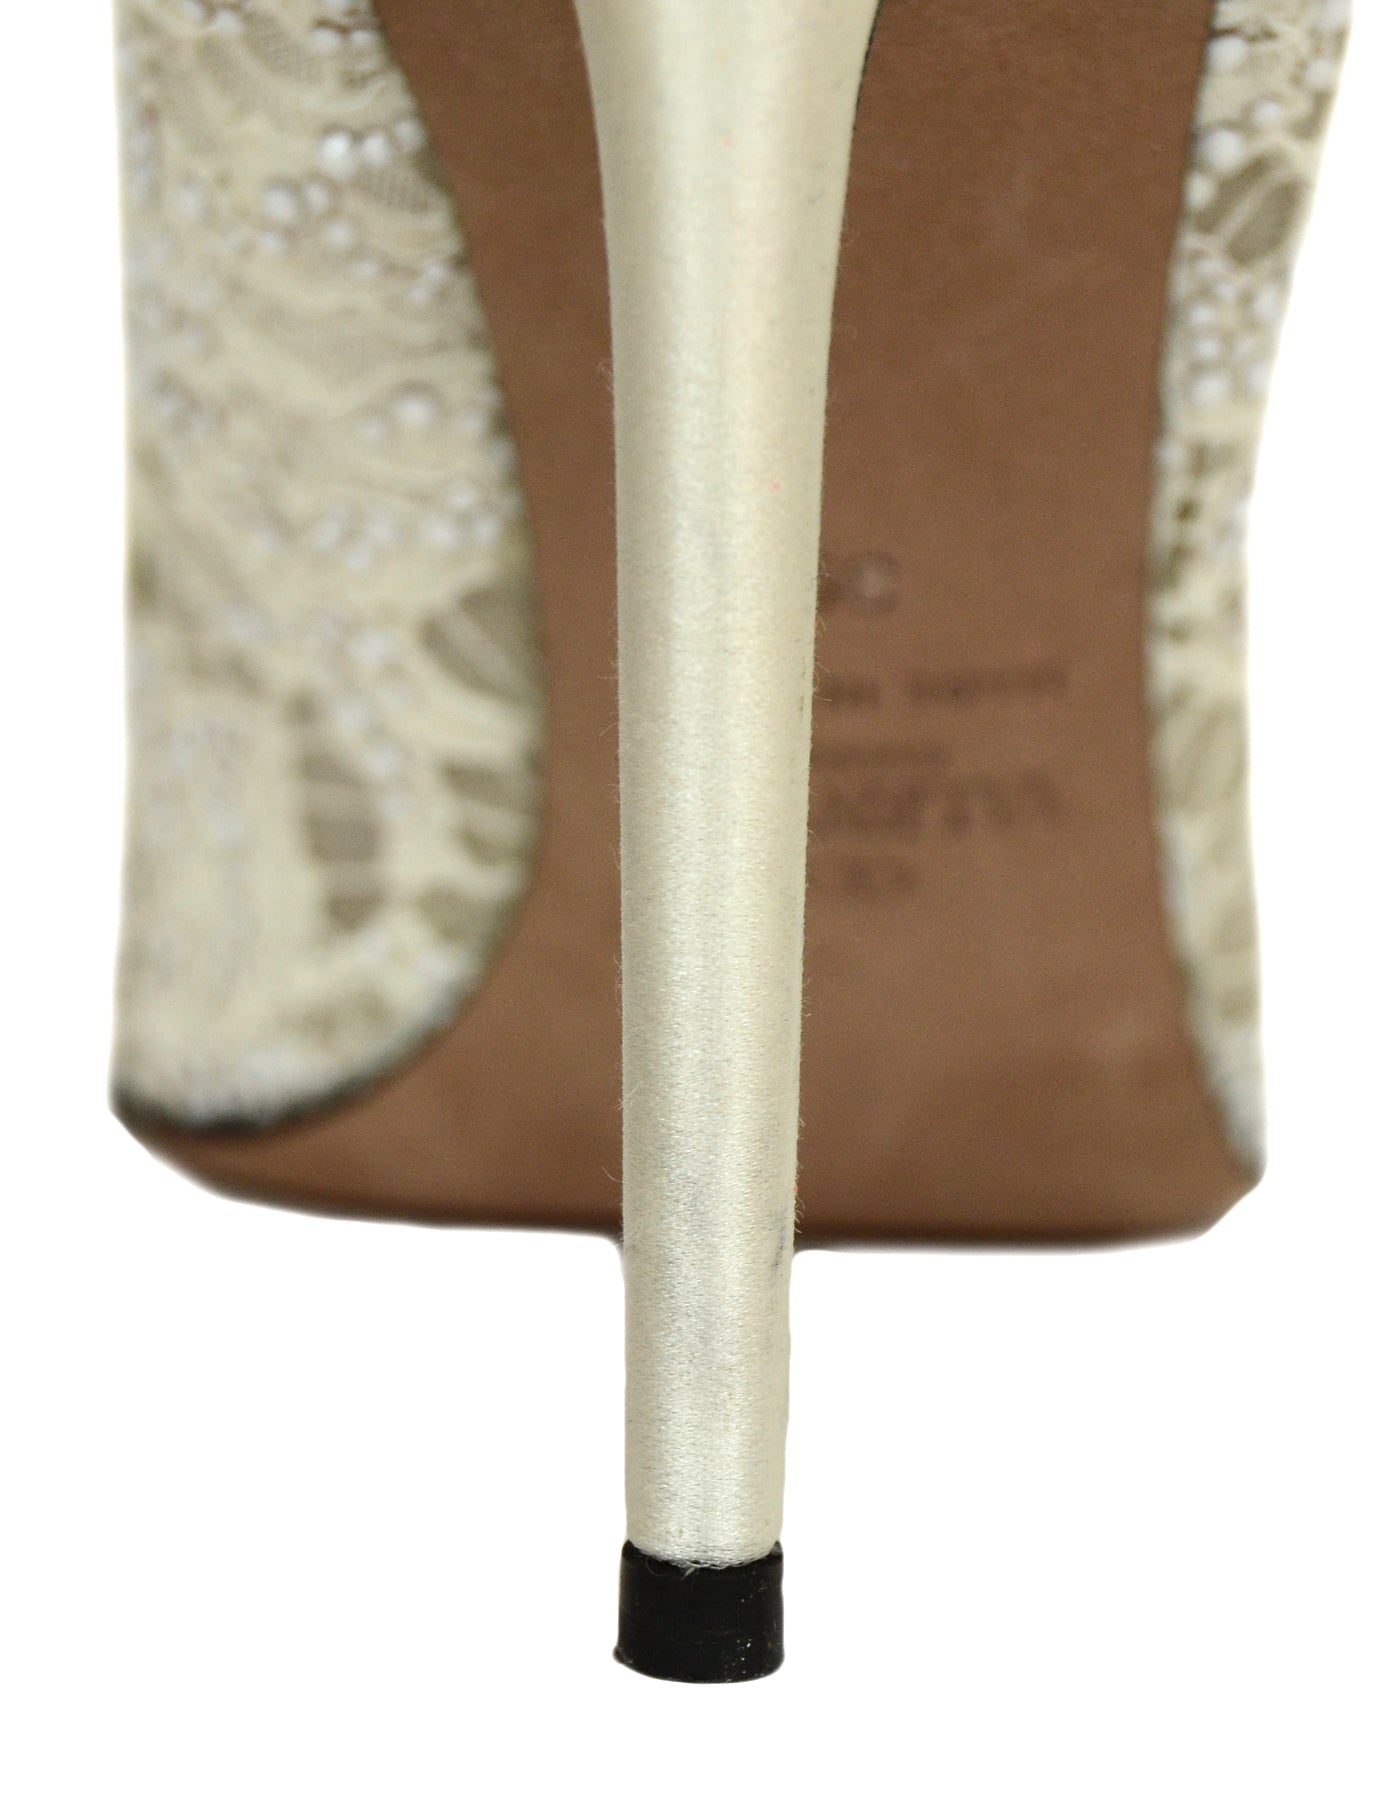 Valentino White Lace/Crystal Point Toe Pumps sz 39 rt. $1,695